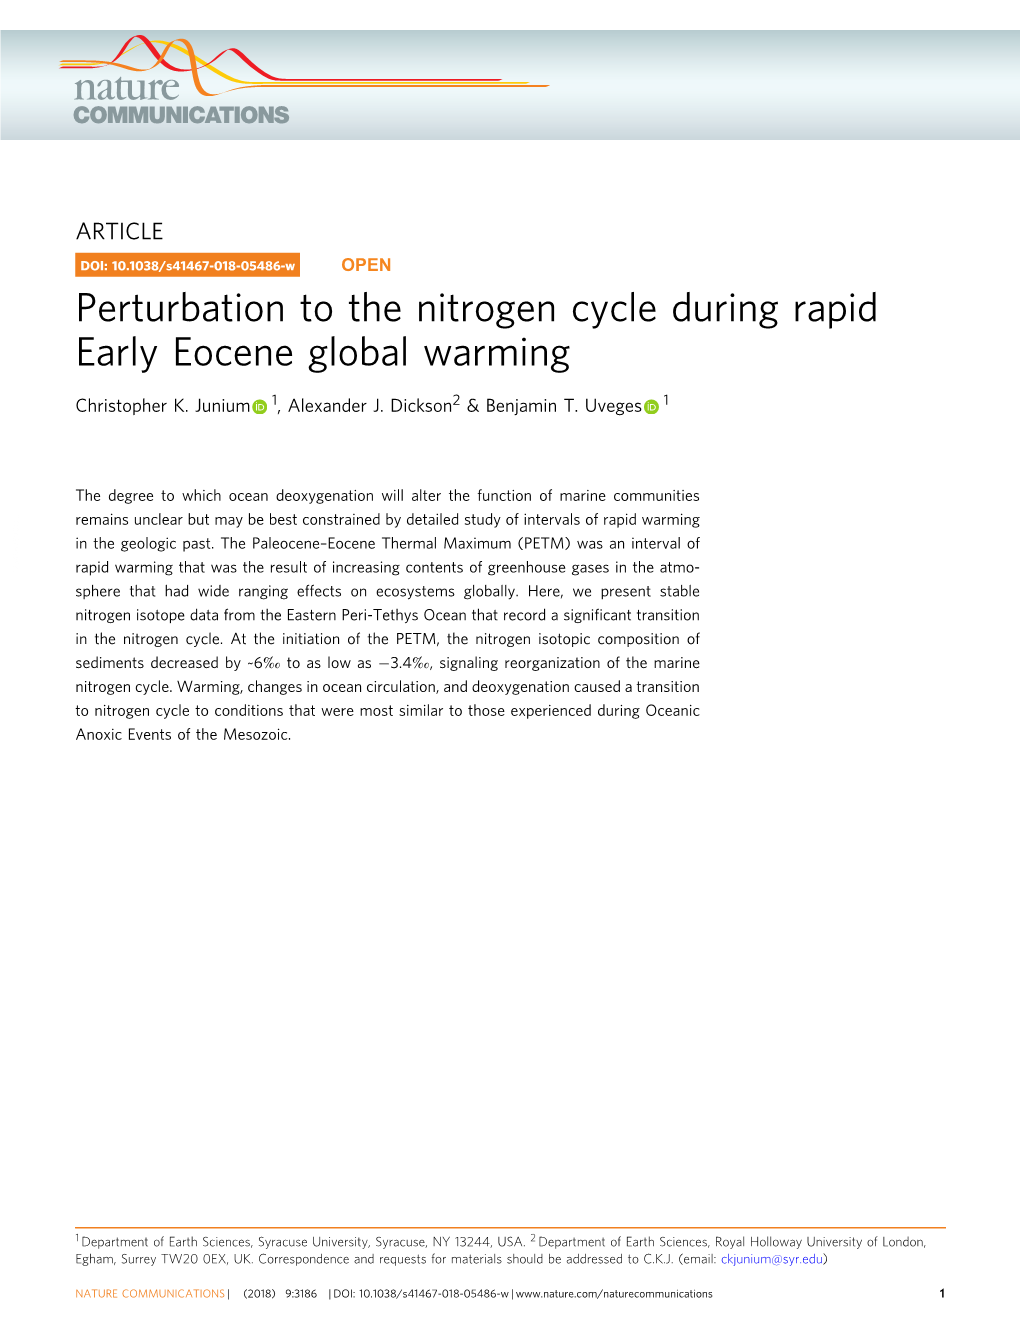 Perturbation to the Nitrogen Cycle During Rapid Early Eocene Global Warming